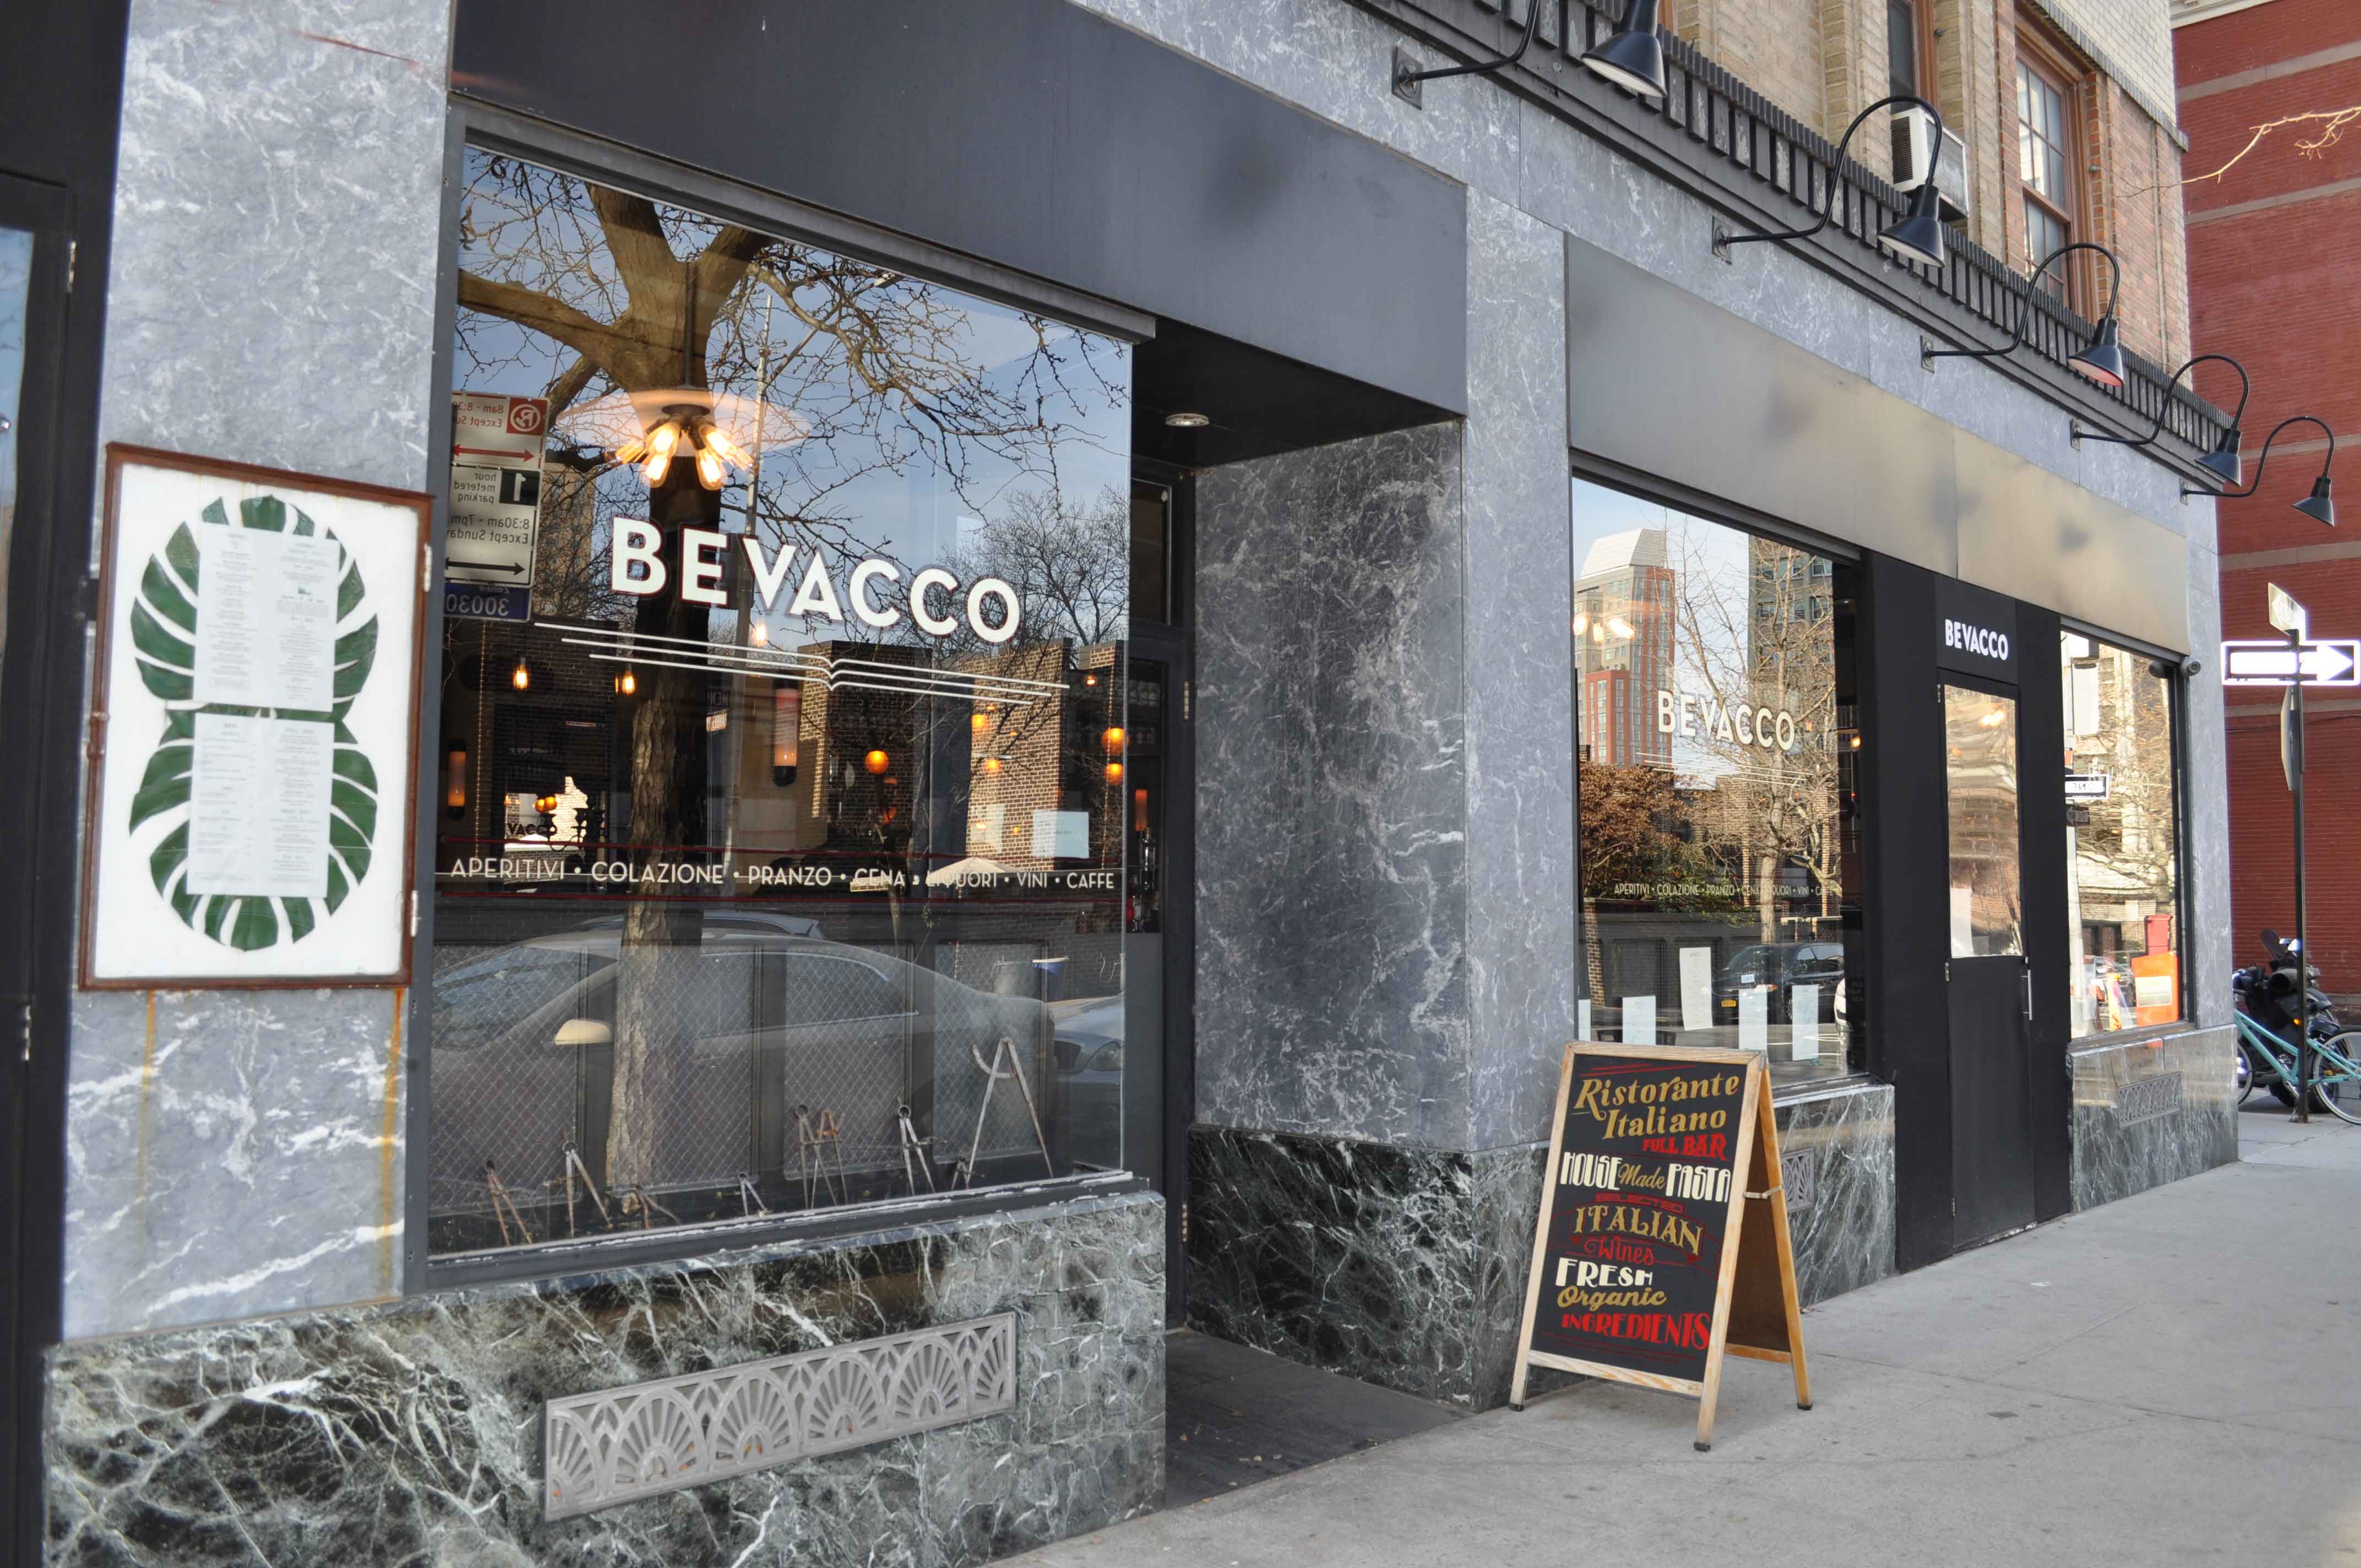 A Brooklyn favorite, Bevacco, pictured, is an Italian trattoria offering seasonal fare & craft cocktails in stylish bistro environs, just minutes from 2 Pierrepont Street